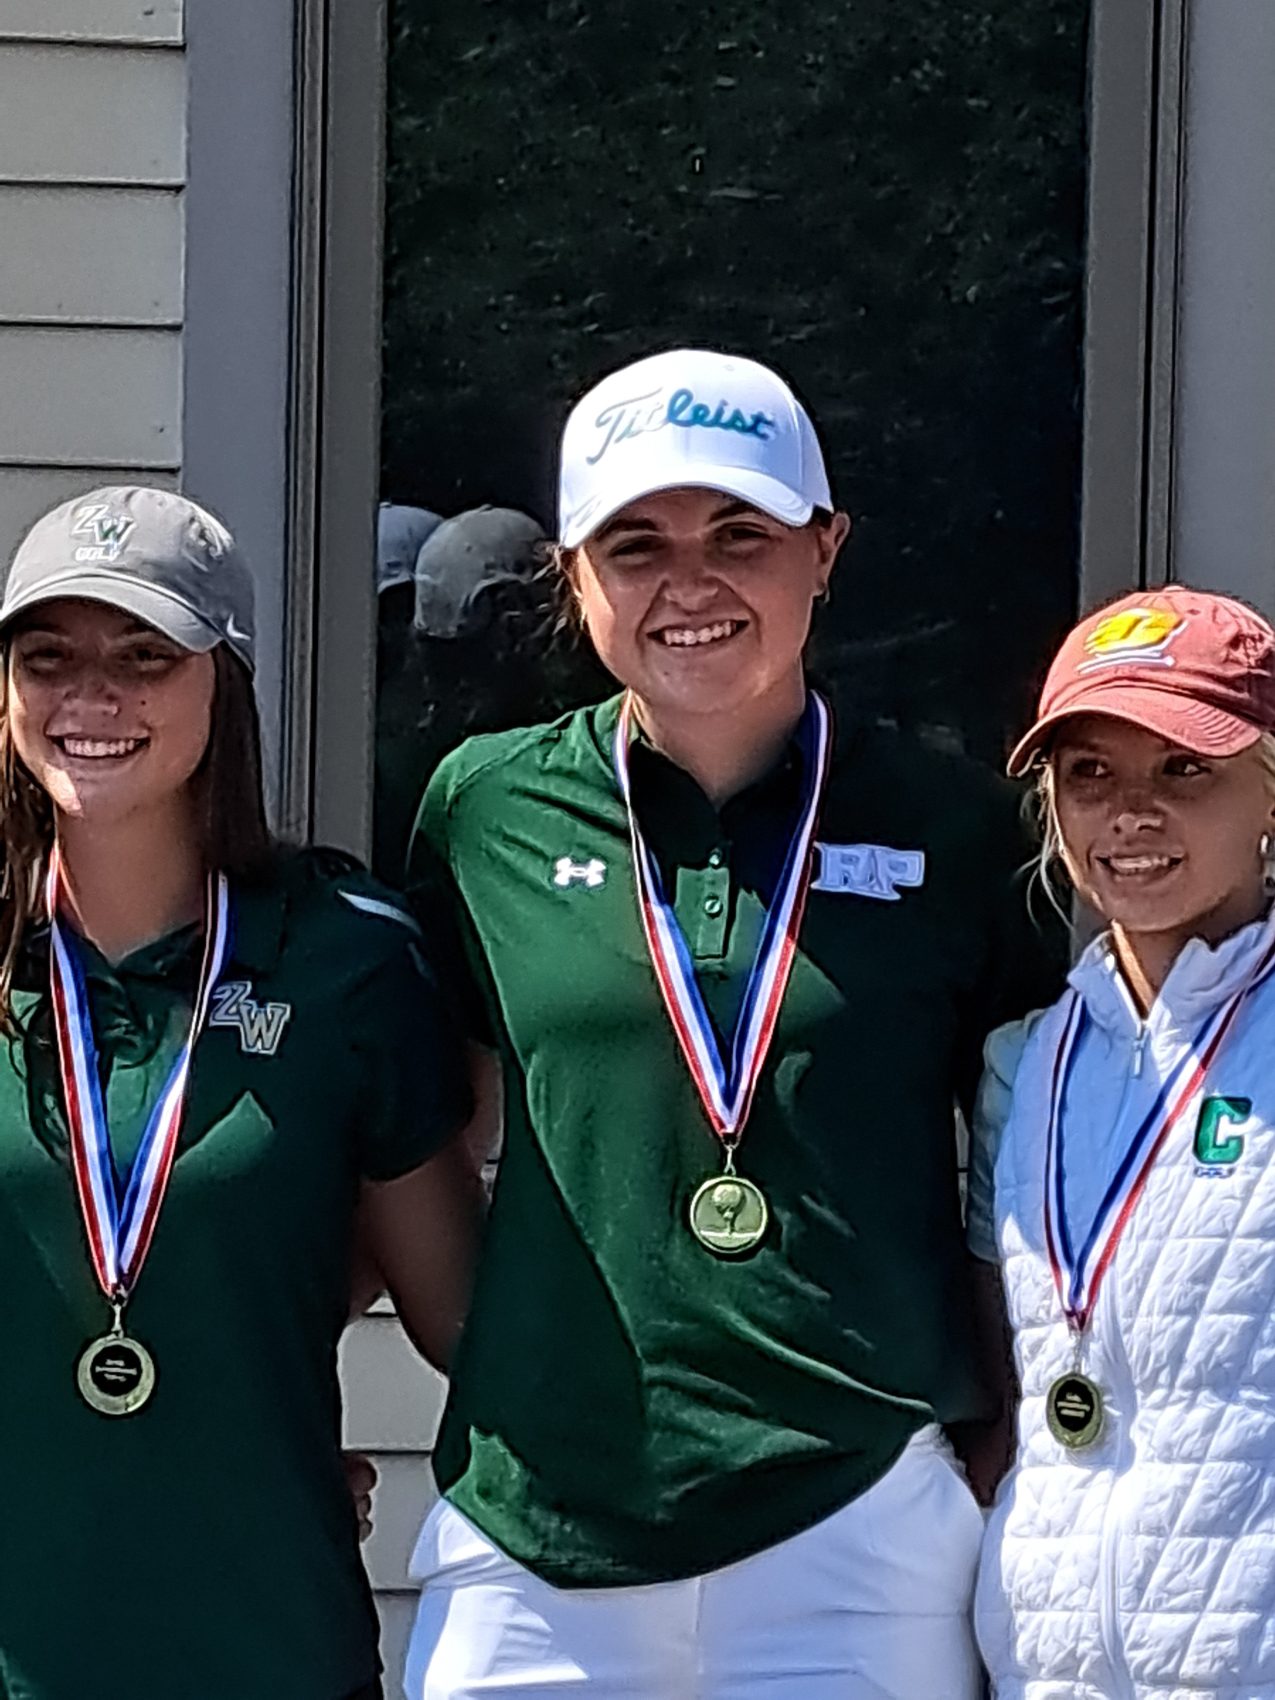 Reeths-Puffer turns in a strong performance, finishes fourth at Pupel Golf Invitational